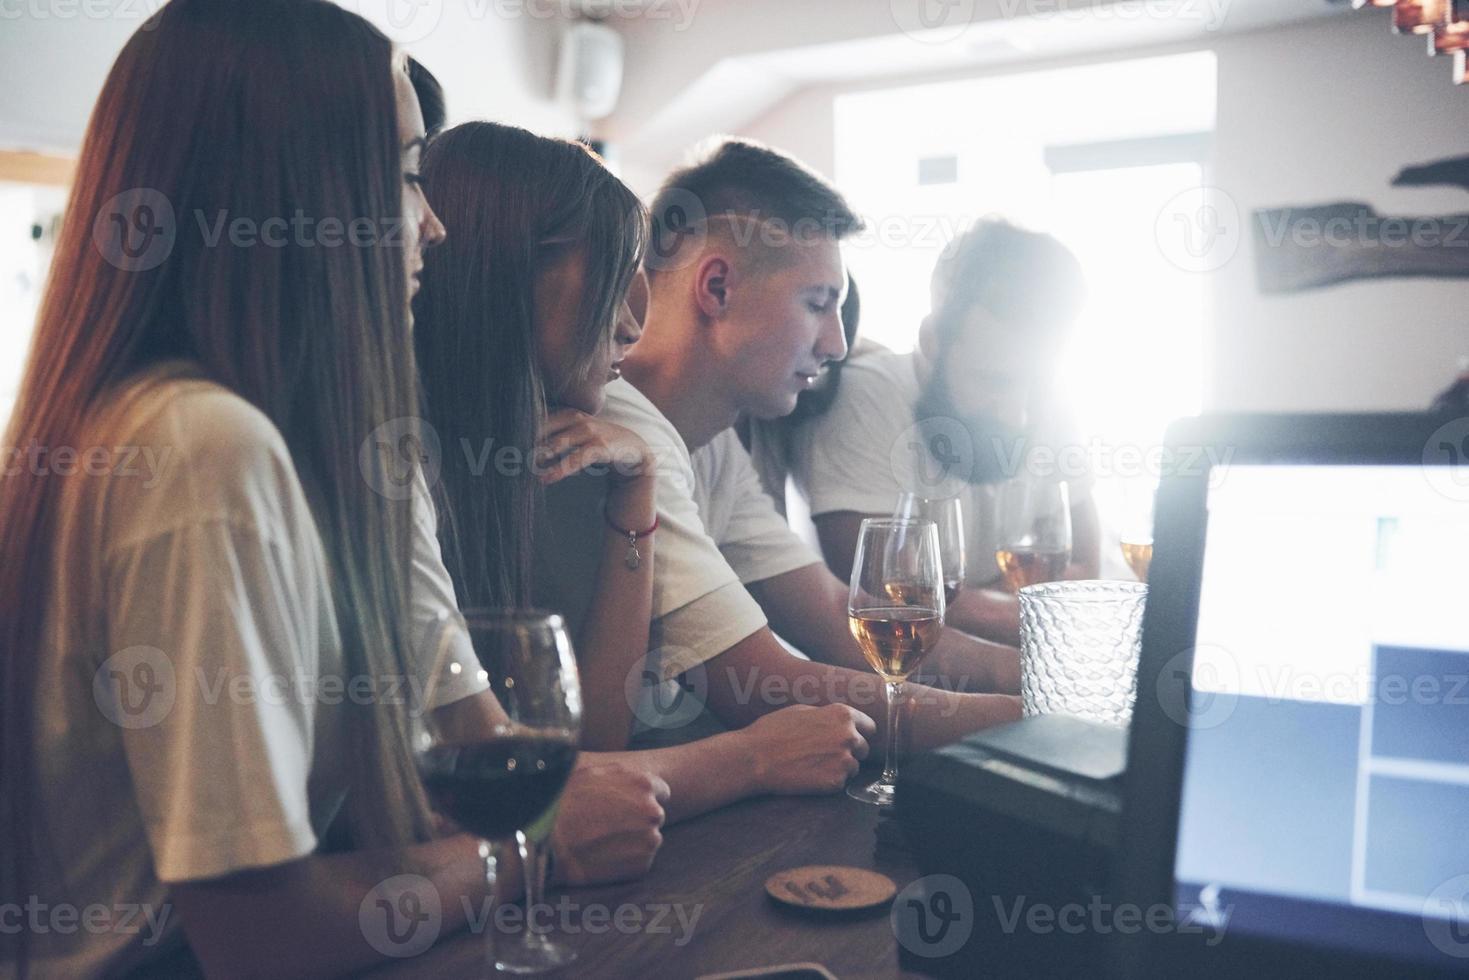 Leisure and communication concept. Group of happy smiling friends enjoying drinks and talking at bar or pub photo